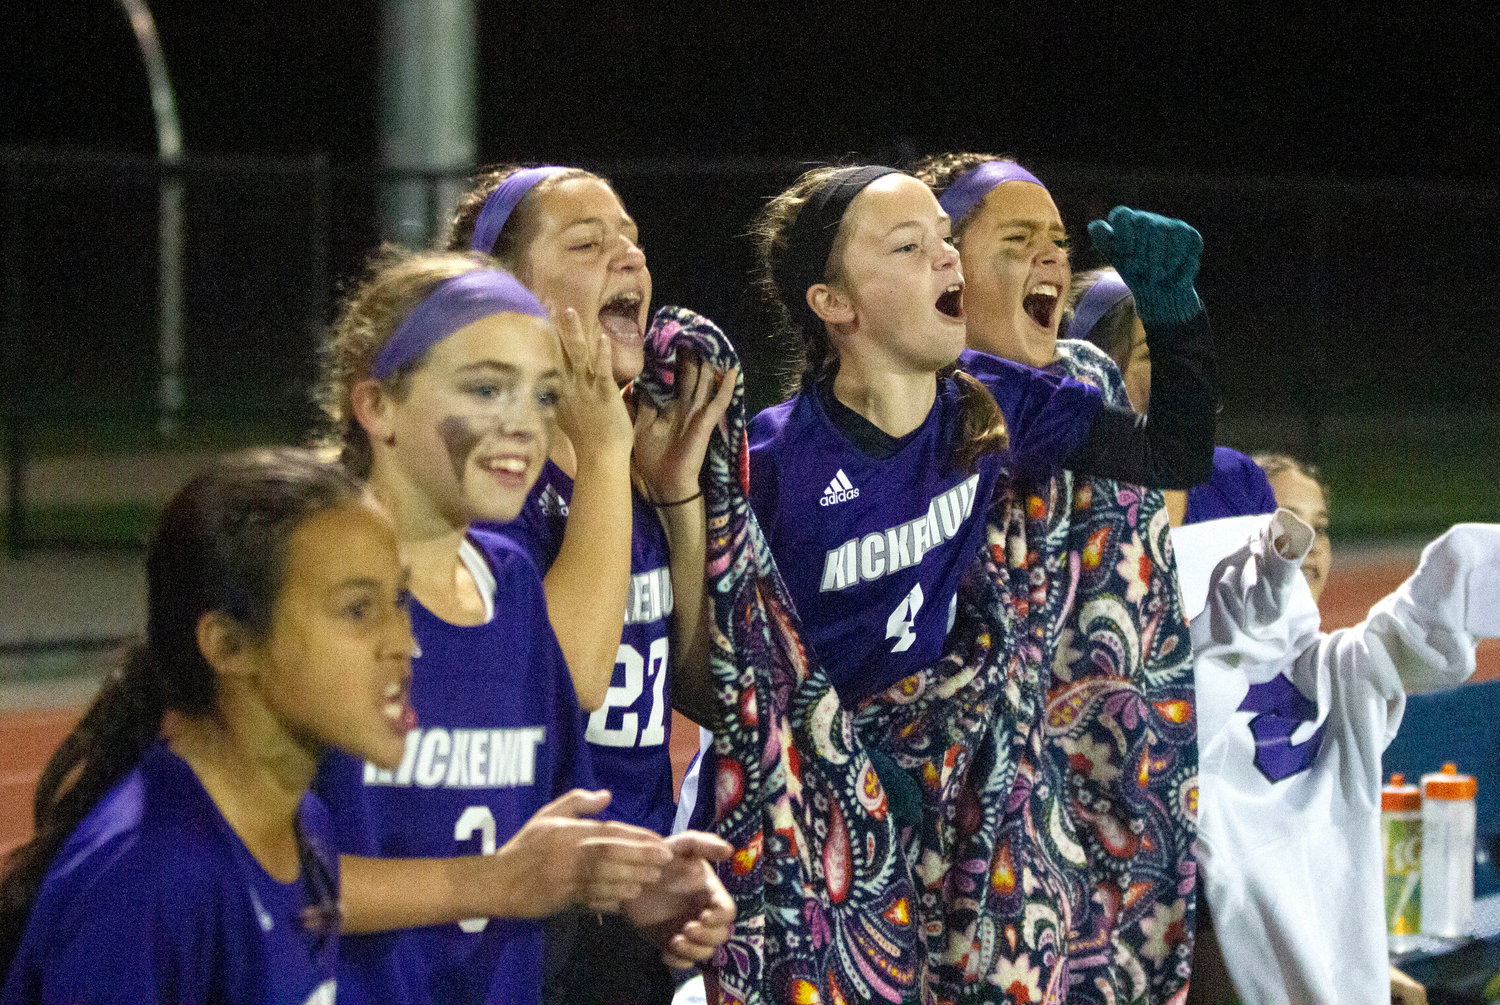 Maya Goglia (left), Ava Morissette, Norah Francis, Catherine Frawley and others cheer on their teammates from the bench.